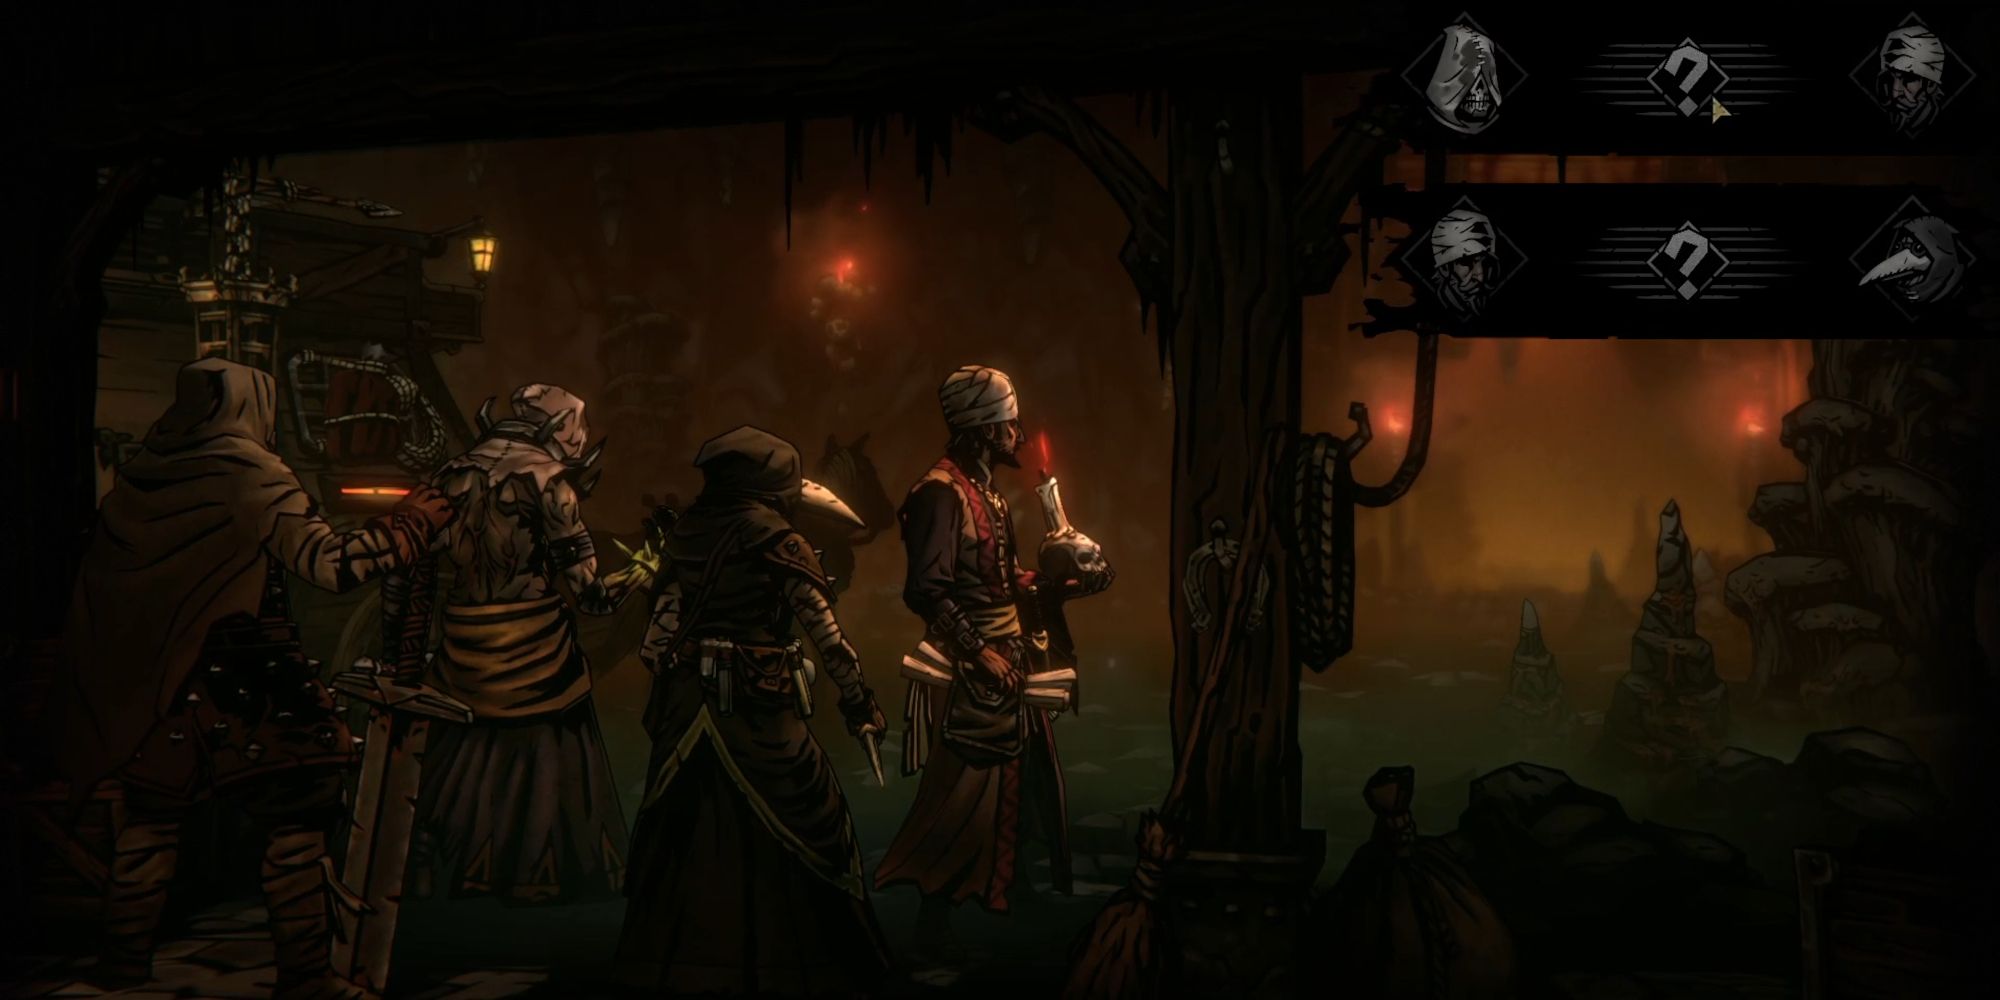 Affinity turning into a relationship in Darkest Dungeon 2